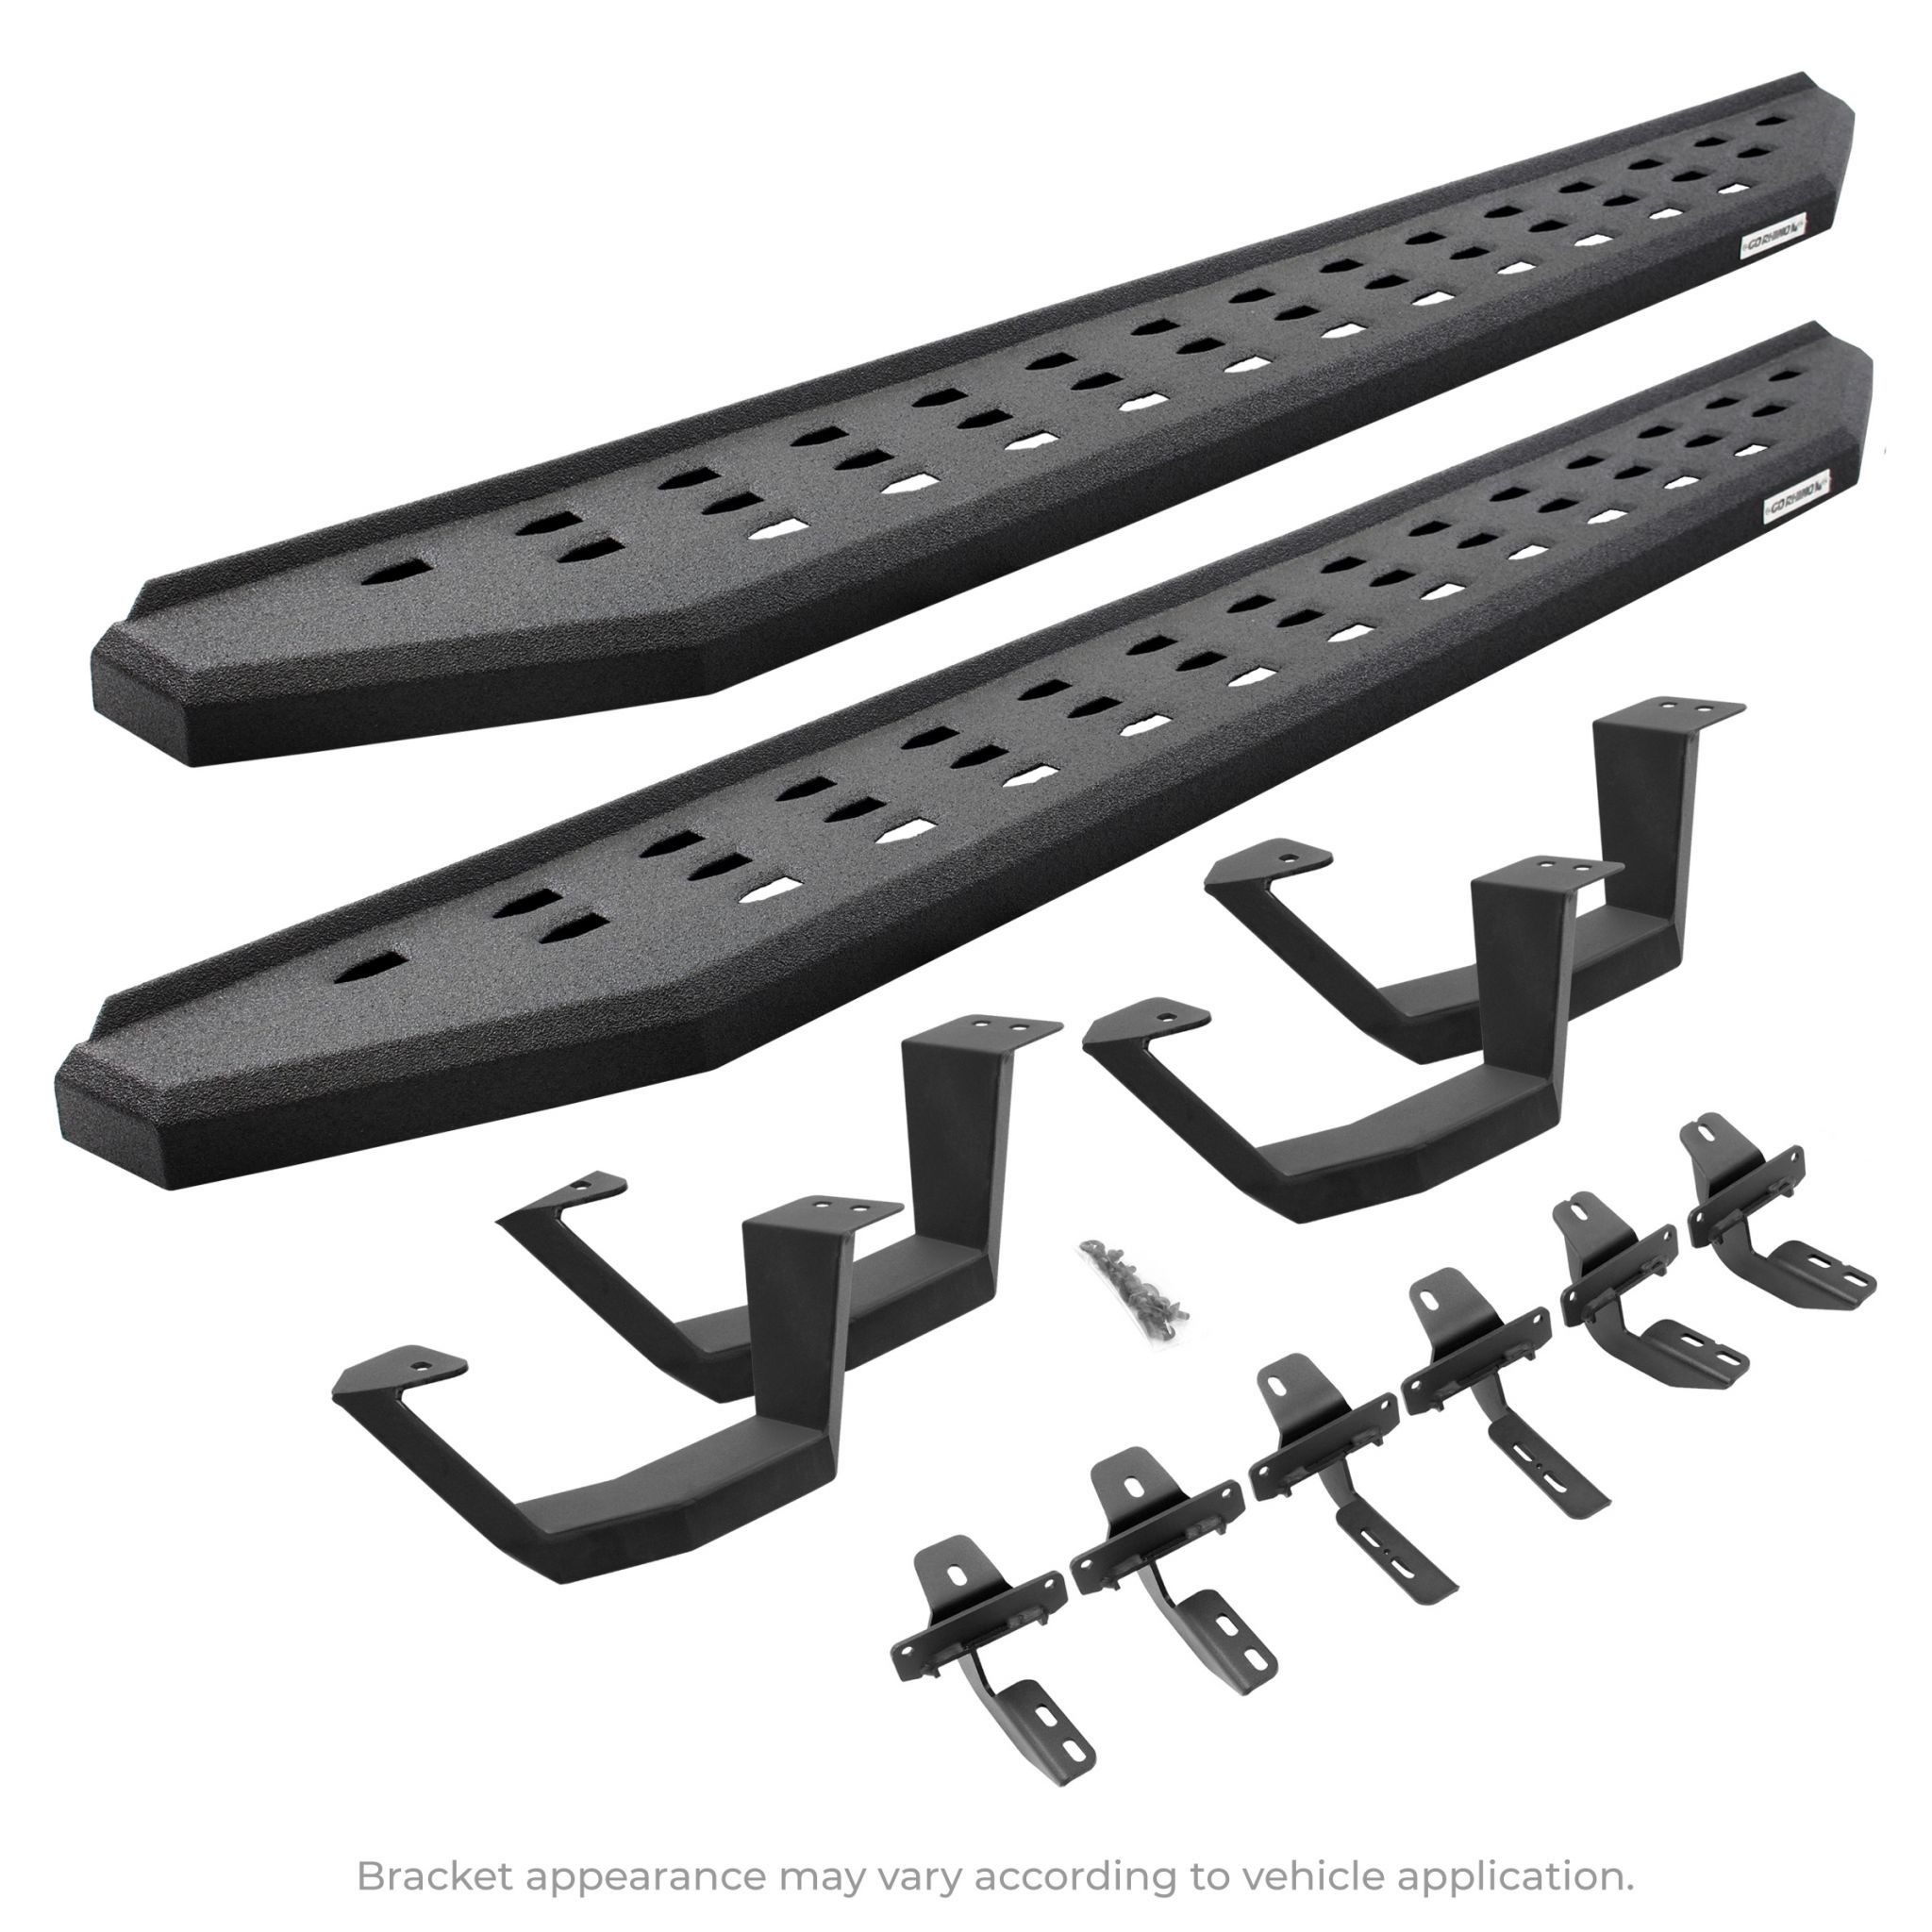 Go Rhino - 6940998020T - RB20 Running Boards With Mounting Brackets & 2 Pairs of Drop Steps Kit - Protective Bedliner Coating